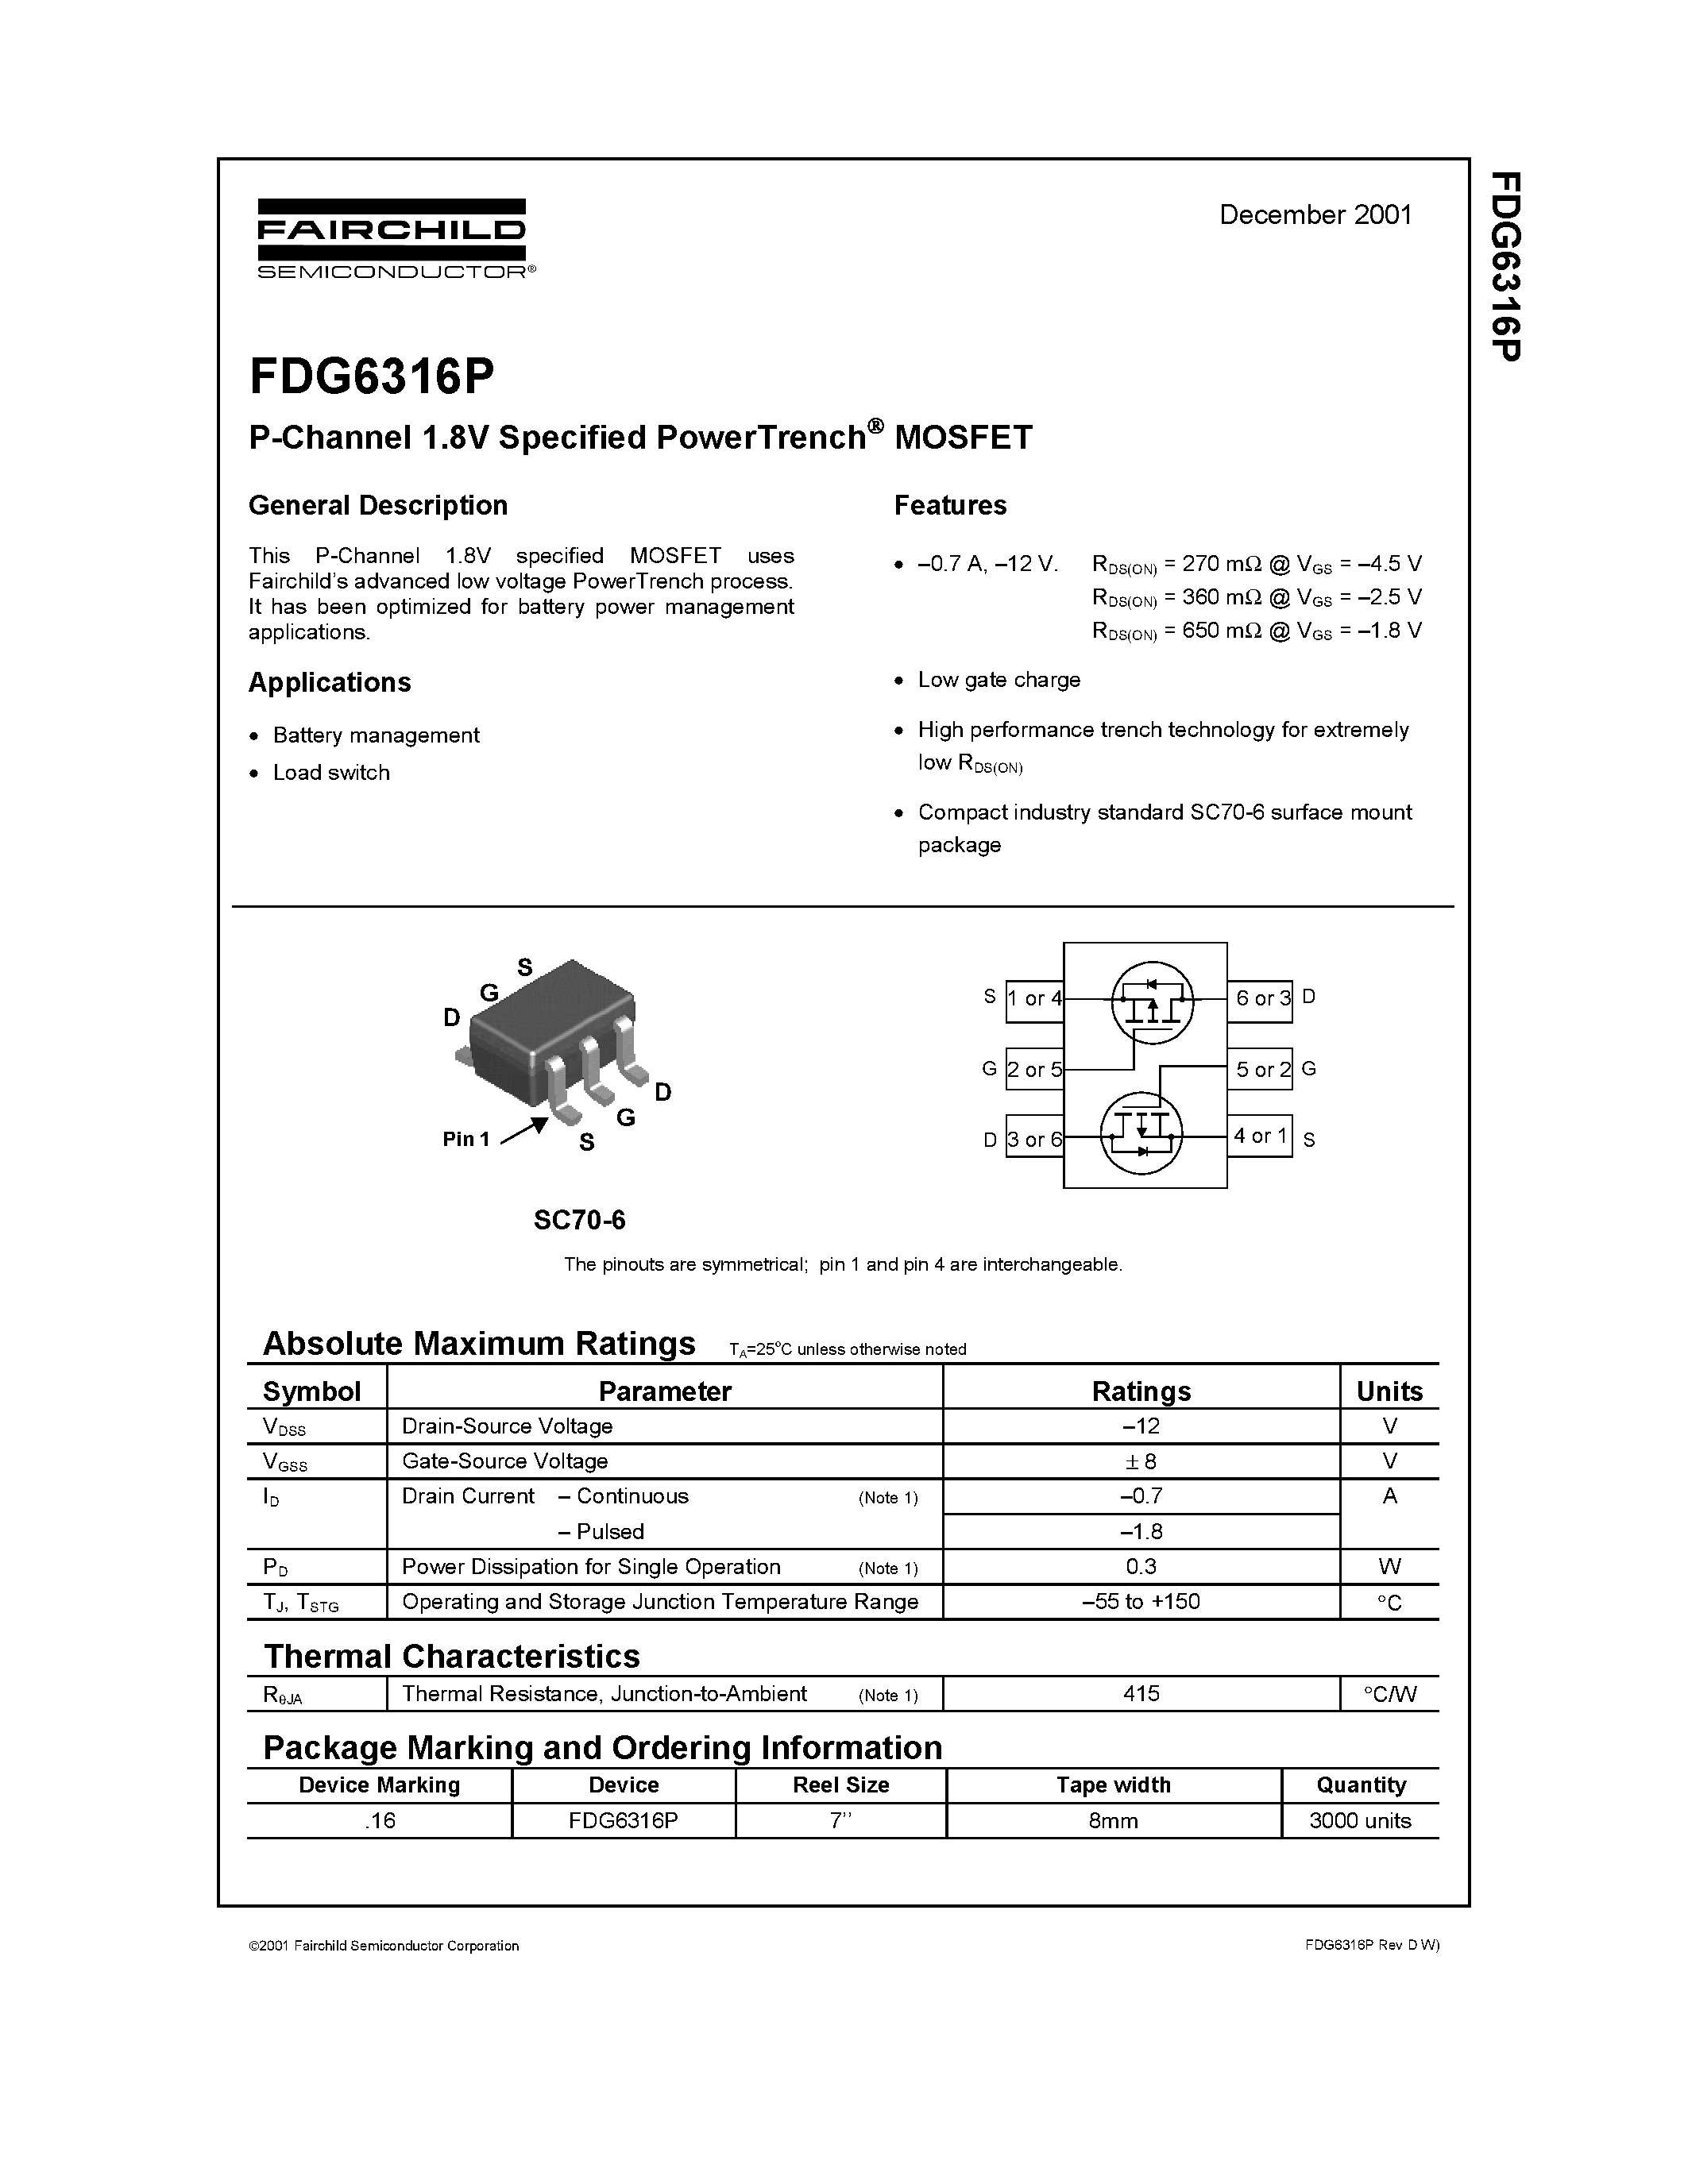 Даташит FDG6316-P-Channel 1.8V Specified PowerTrench MOSFET страница 1